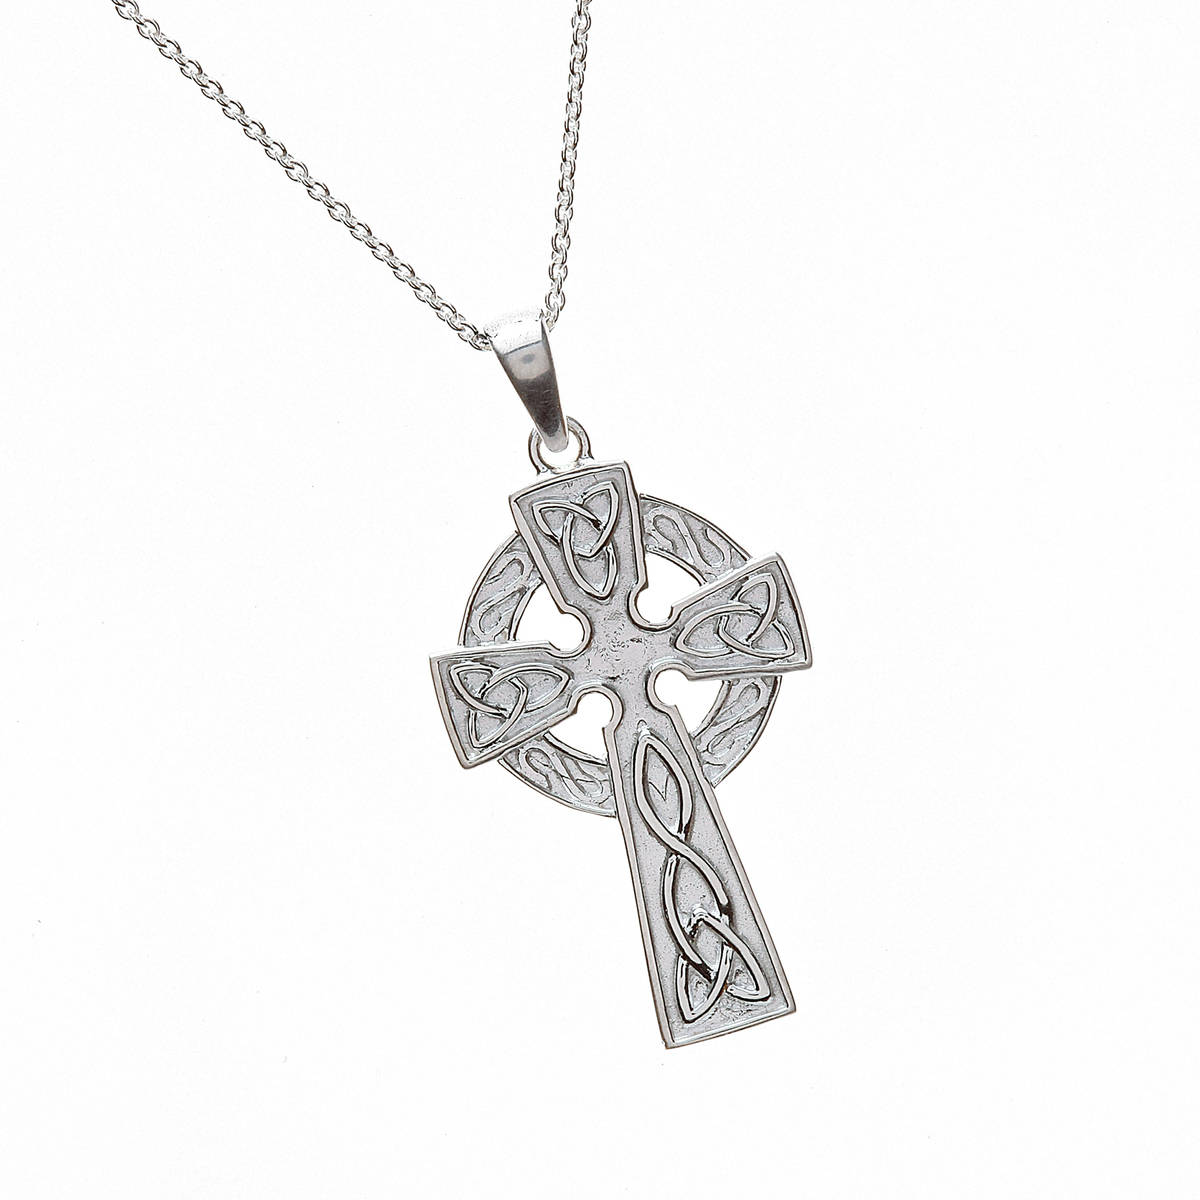 Silver Classic Celtic Cross With Carved Detail On 18" Trace Chain